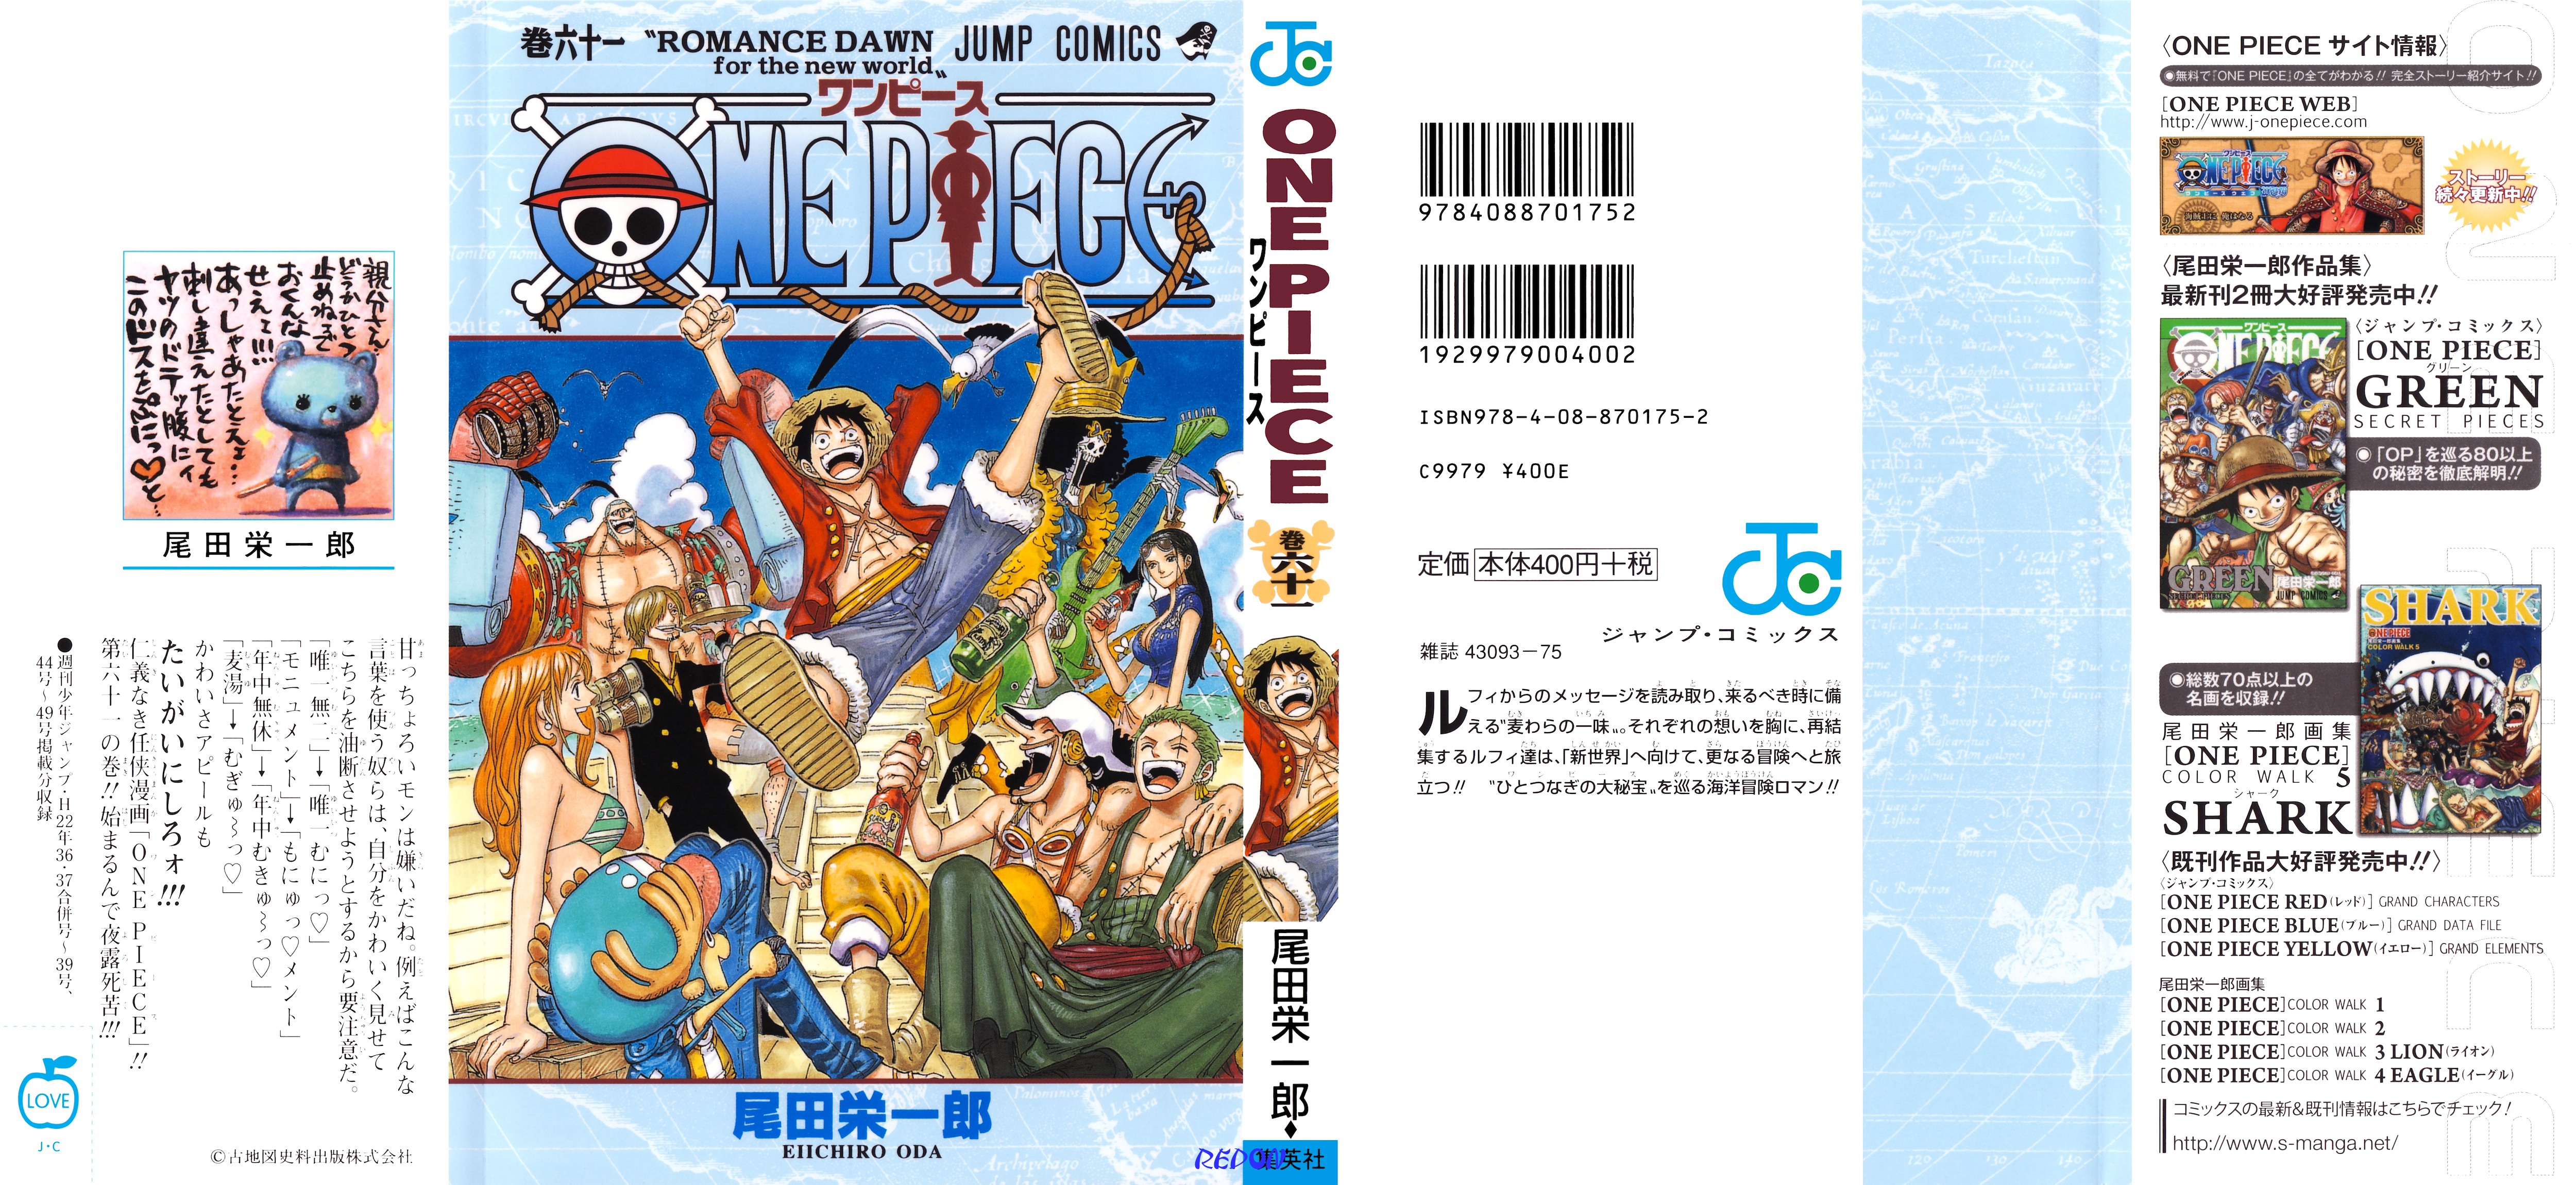 One Piece Vol 61 cover